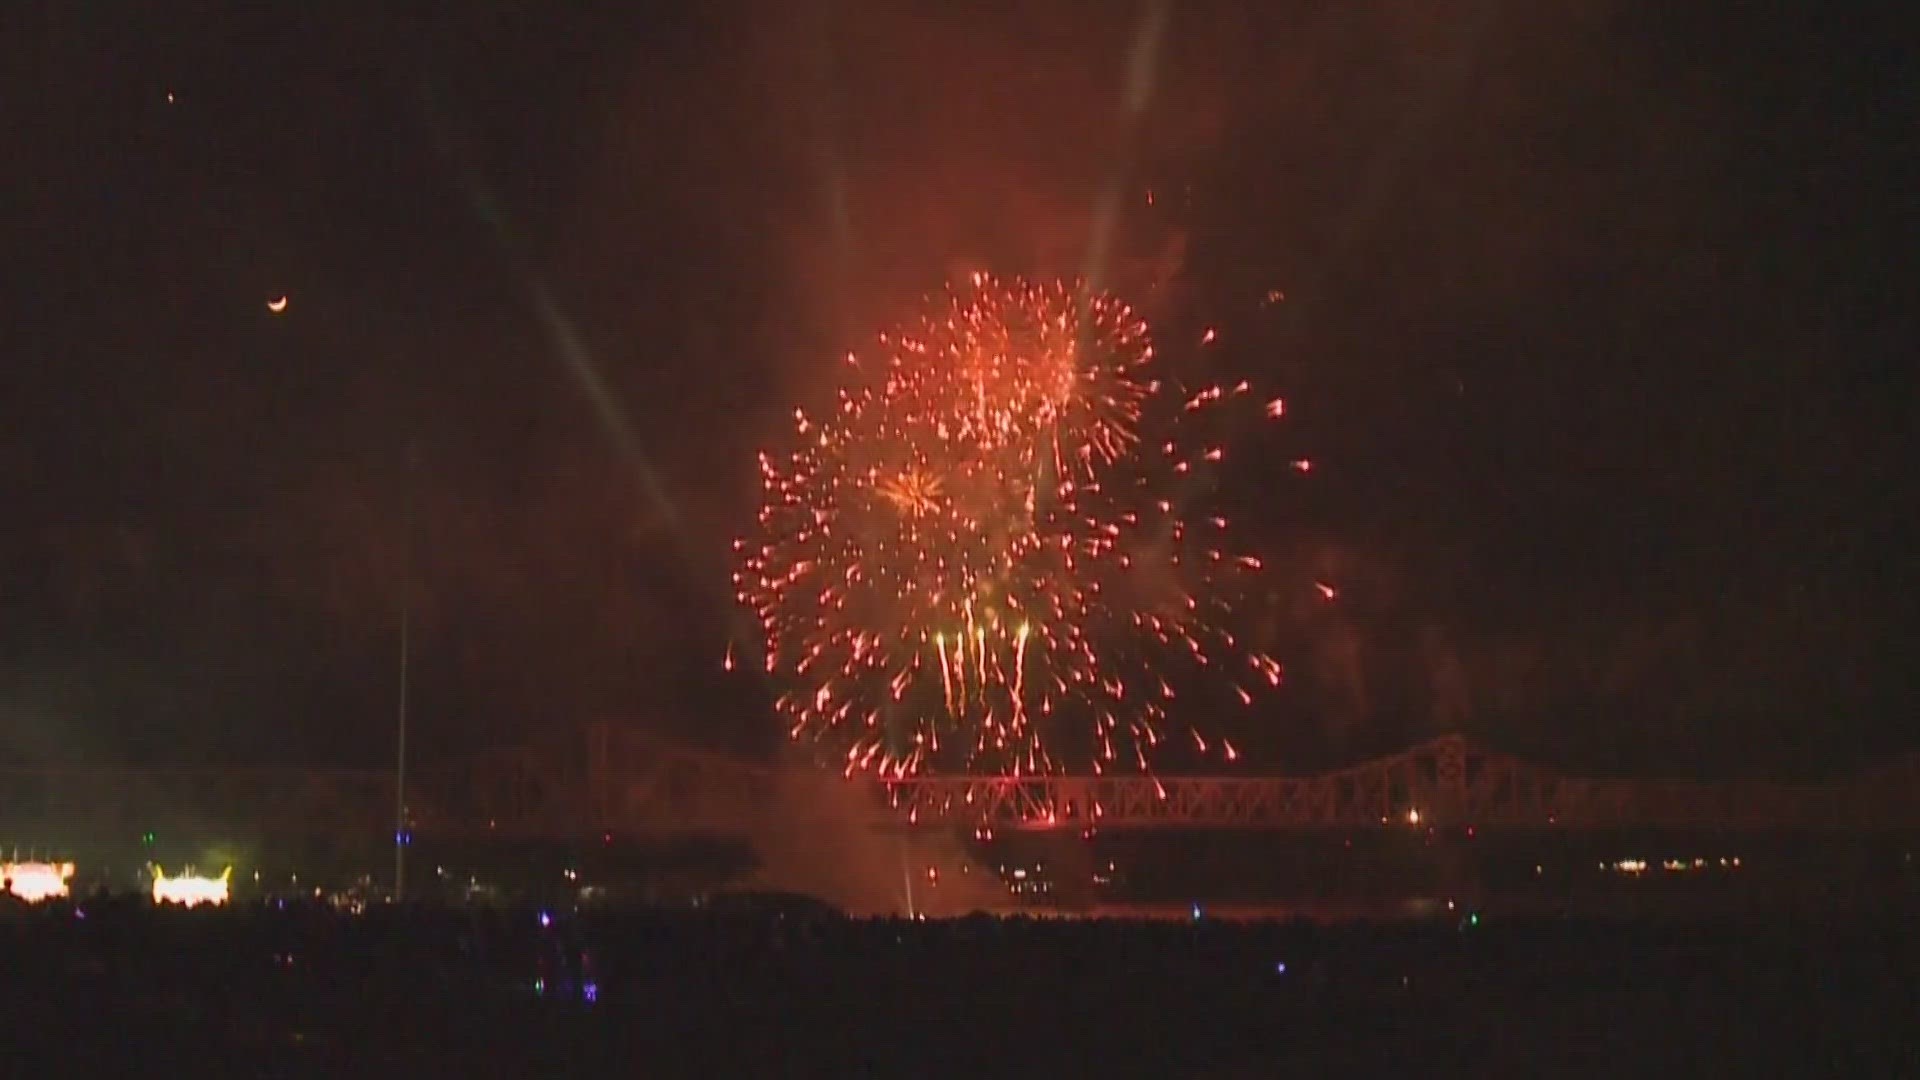 Louisville Metro Police Department has a plan in place for the influx of drivers and people during the iconic fireworks show.